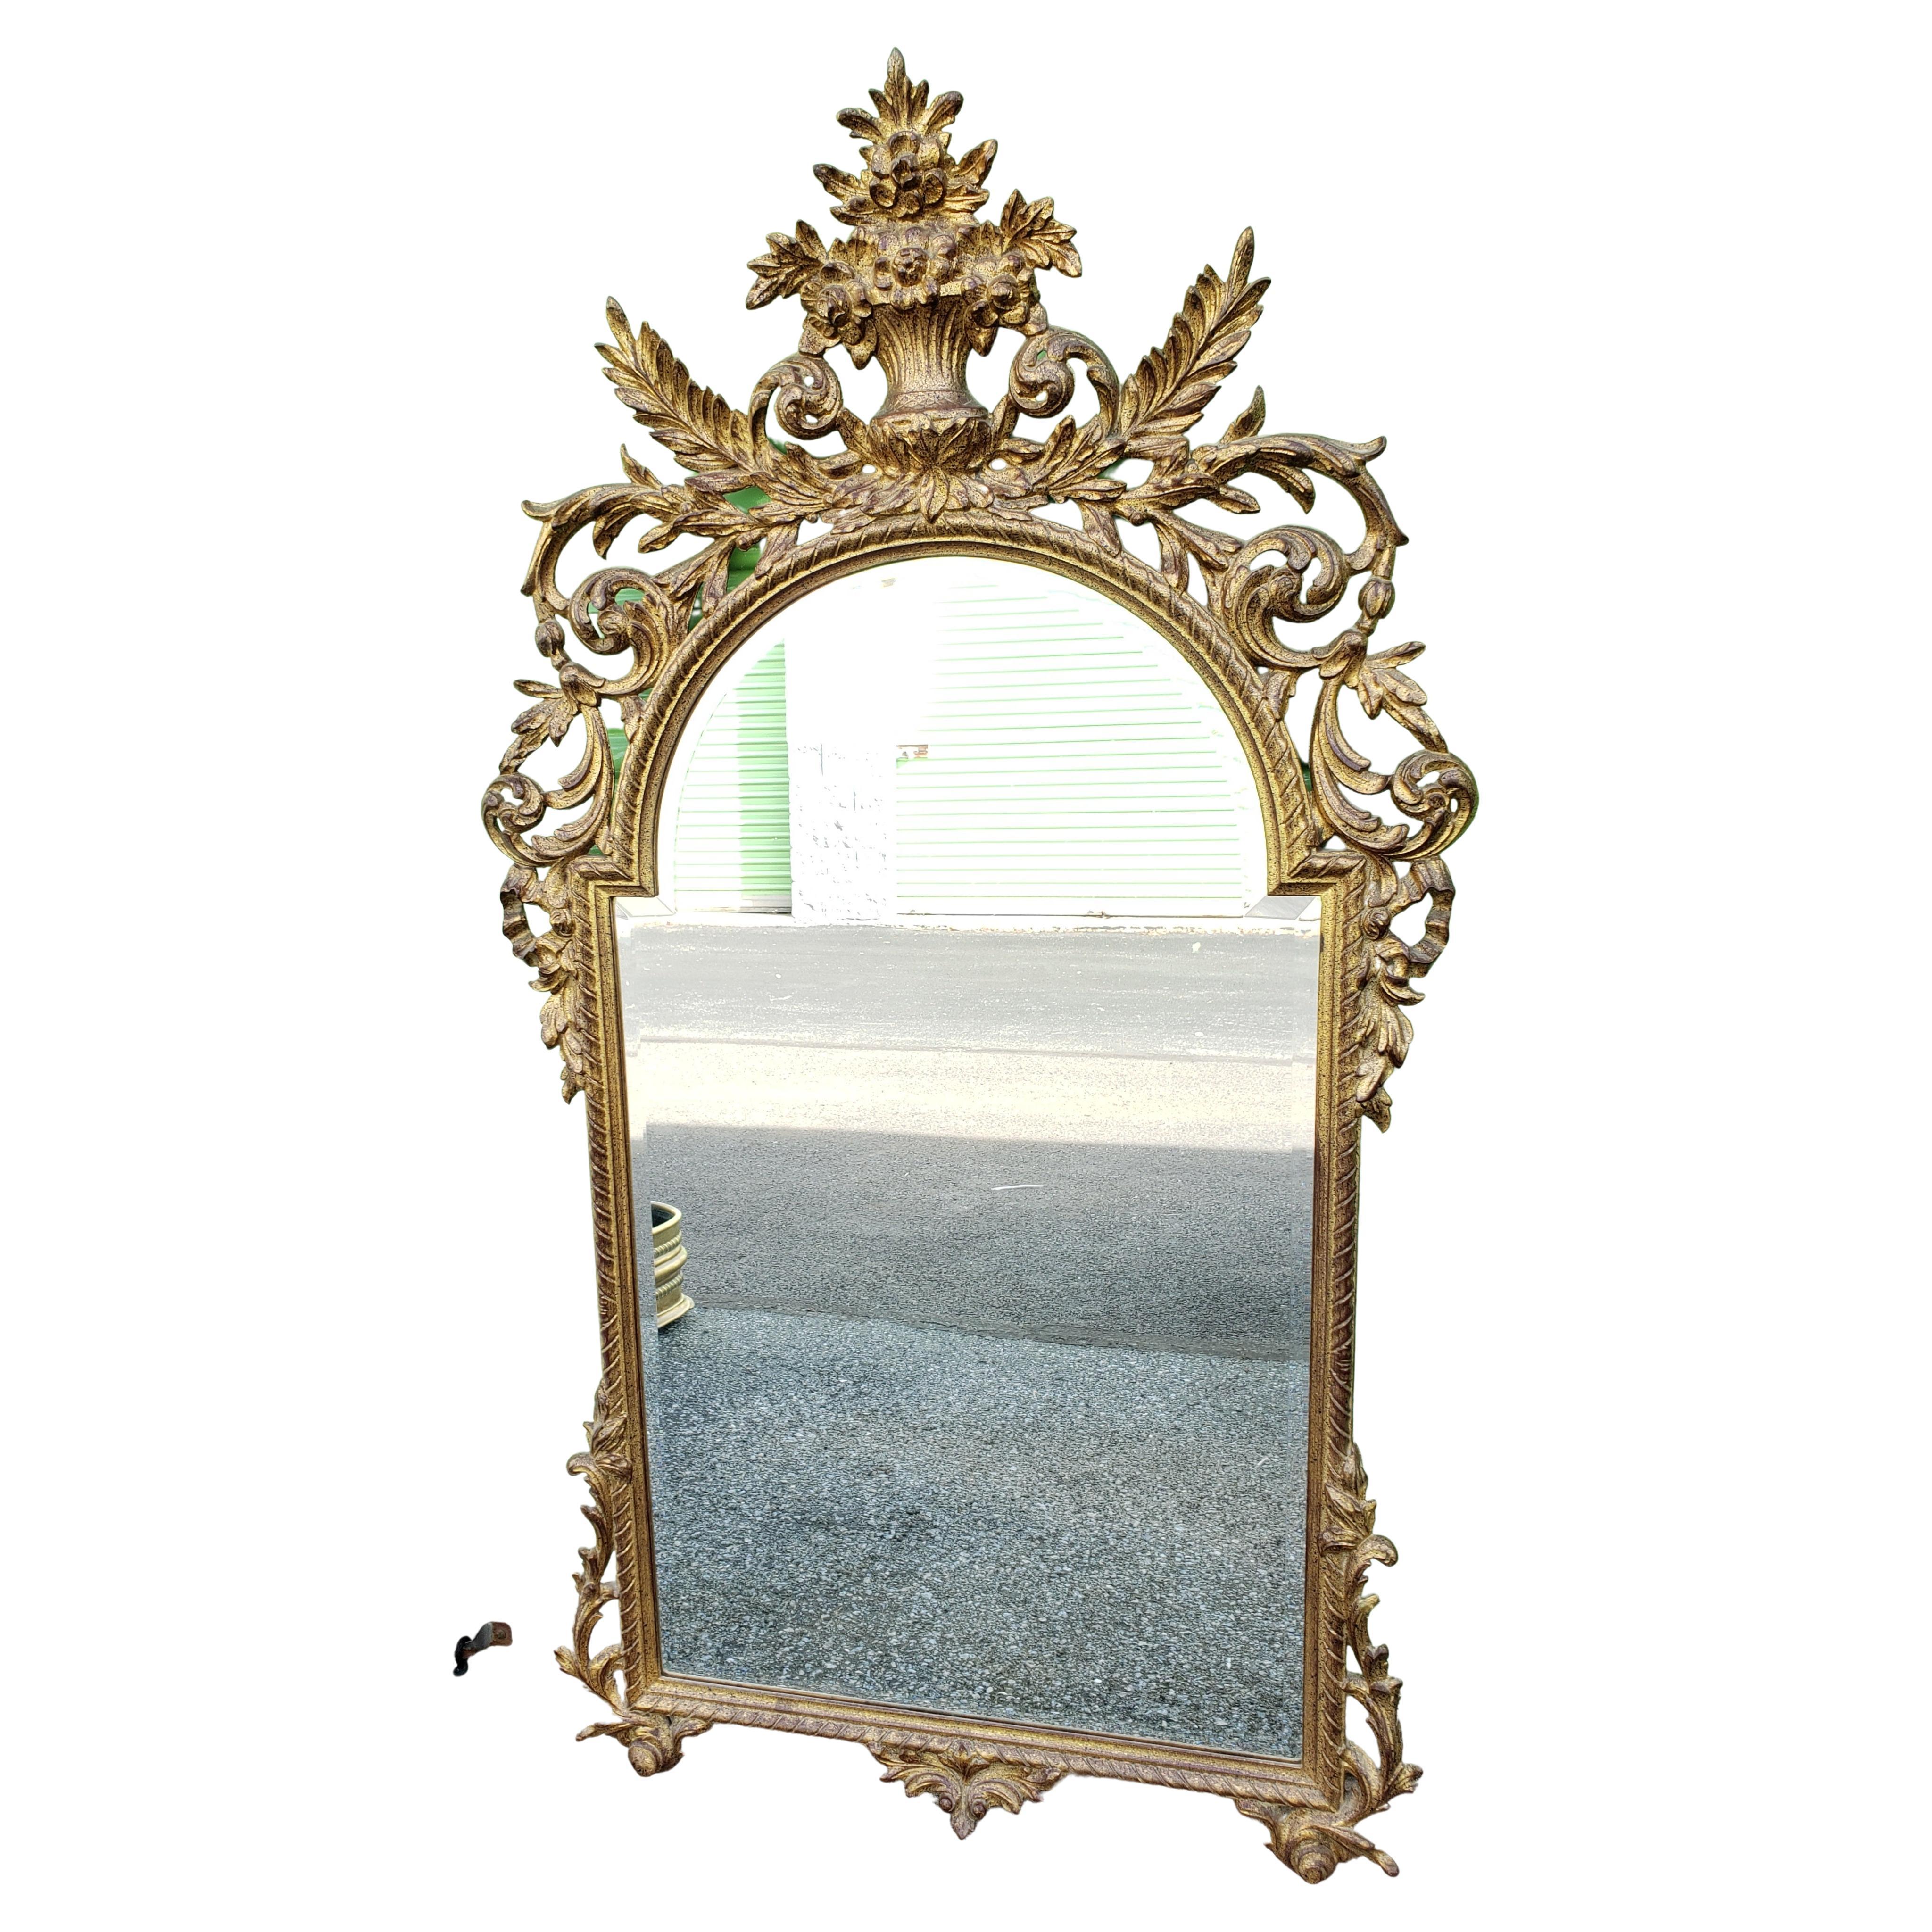 A beautiful Louis XV style gilt decorated beveled wall mirror from Belgium 1964.
Very good vintage condition. 
Measures 31